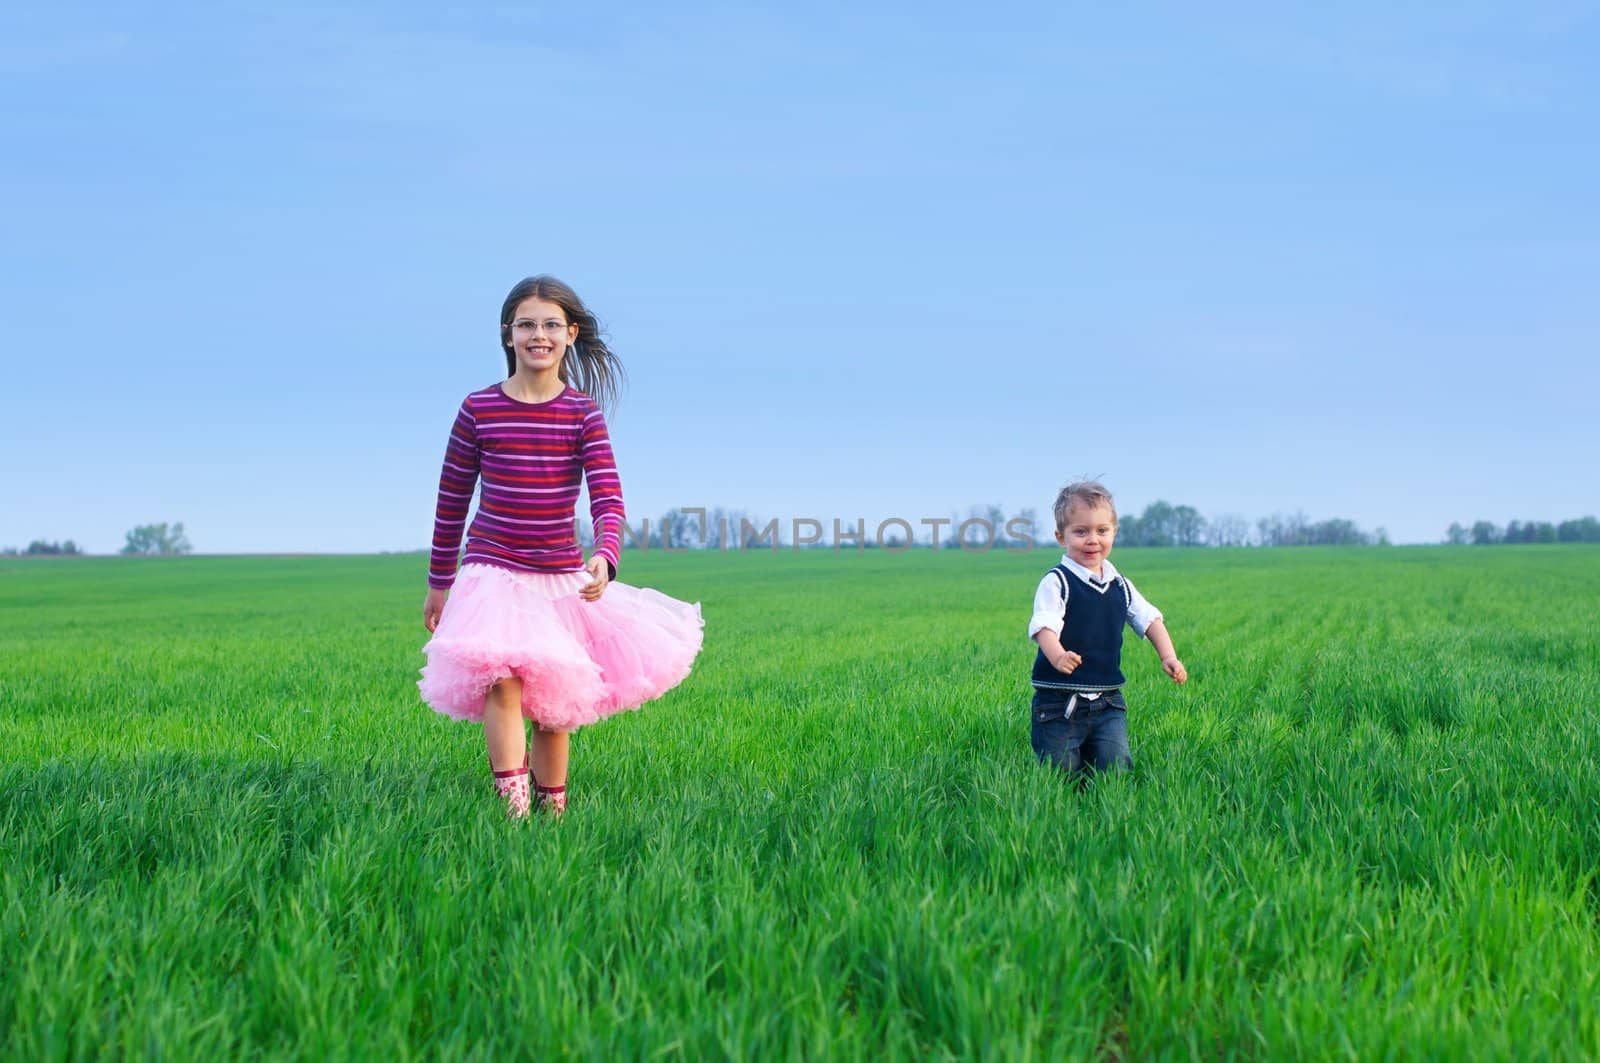 sister runing with her brather on the grass by maxoliki